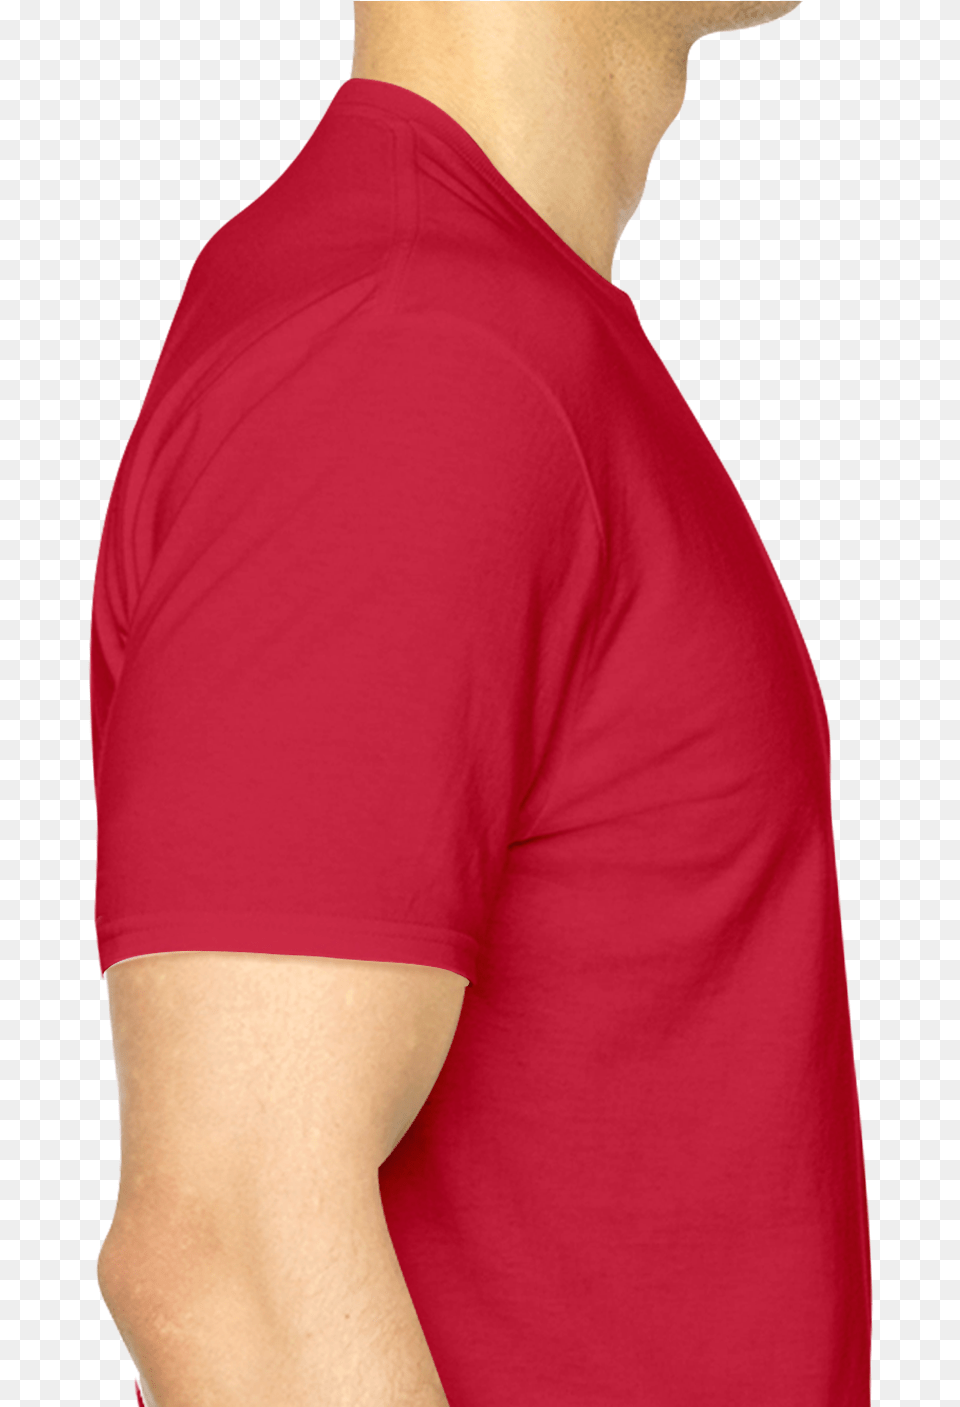 Netflix And Chill Men39s T Shirt Polo Shirt, T-shirt, Clothing, Sleeve, Person Png